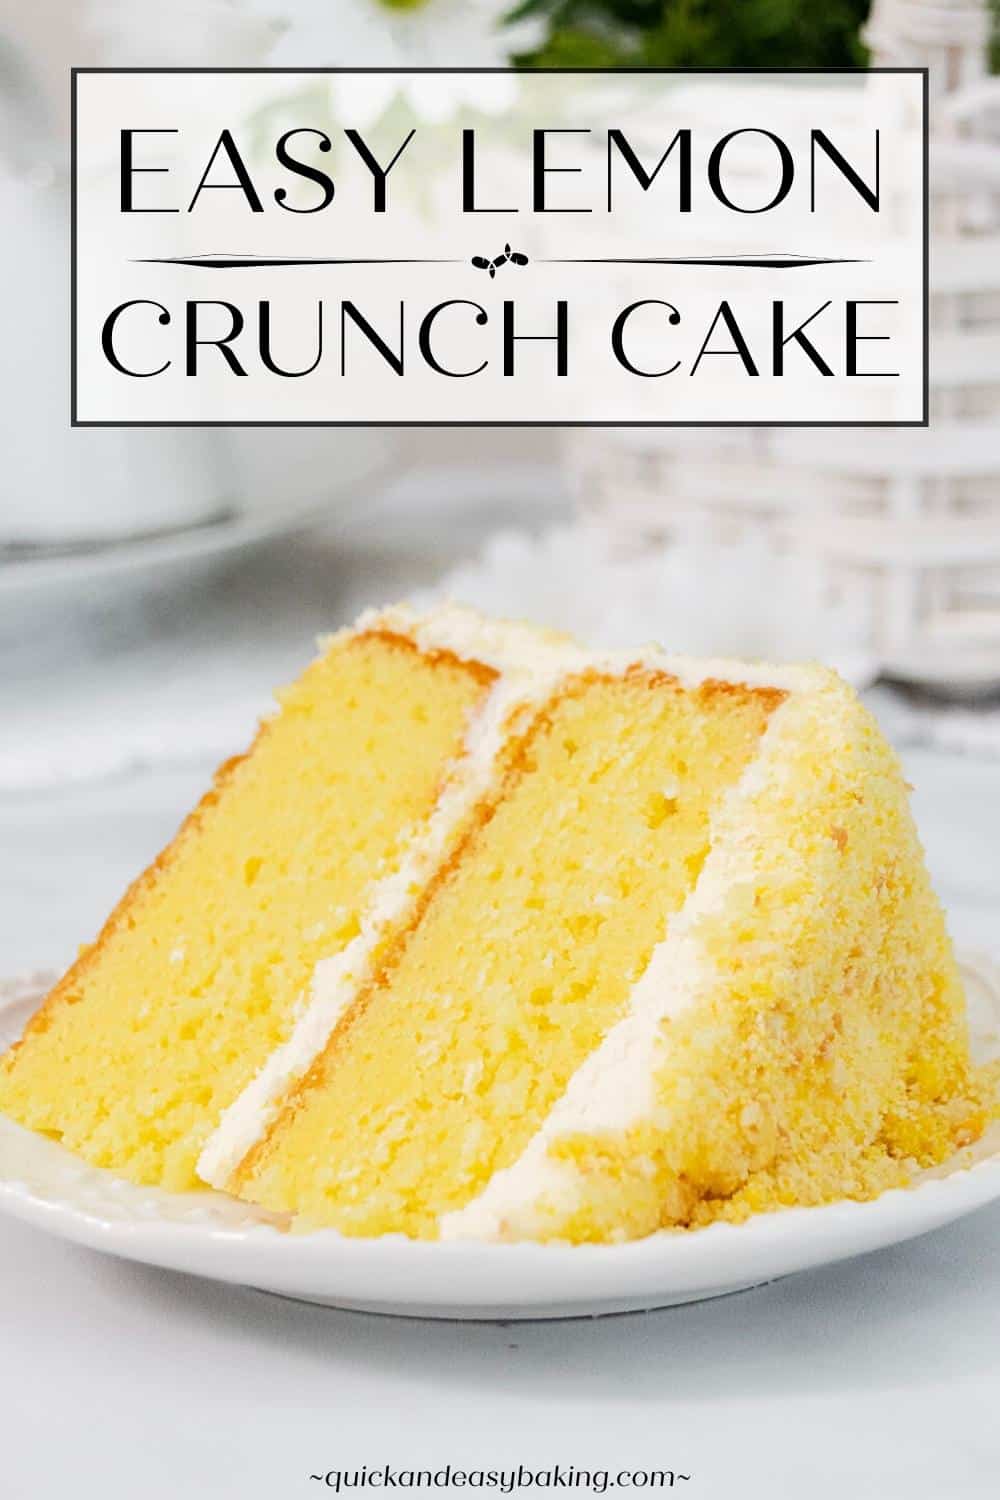 Pinterest image of lemon layer cake with cream cheese frosting and text overlay.